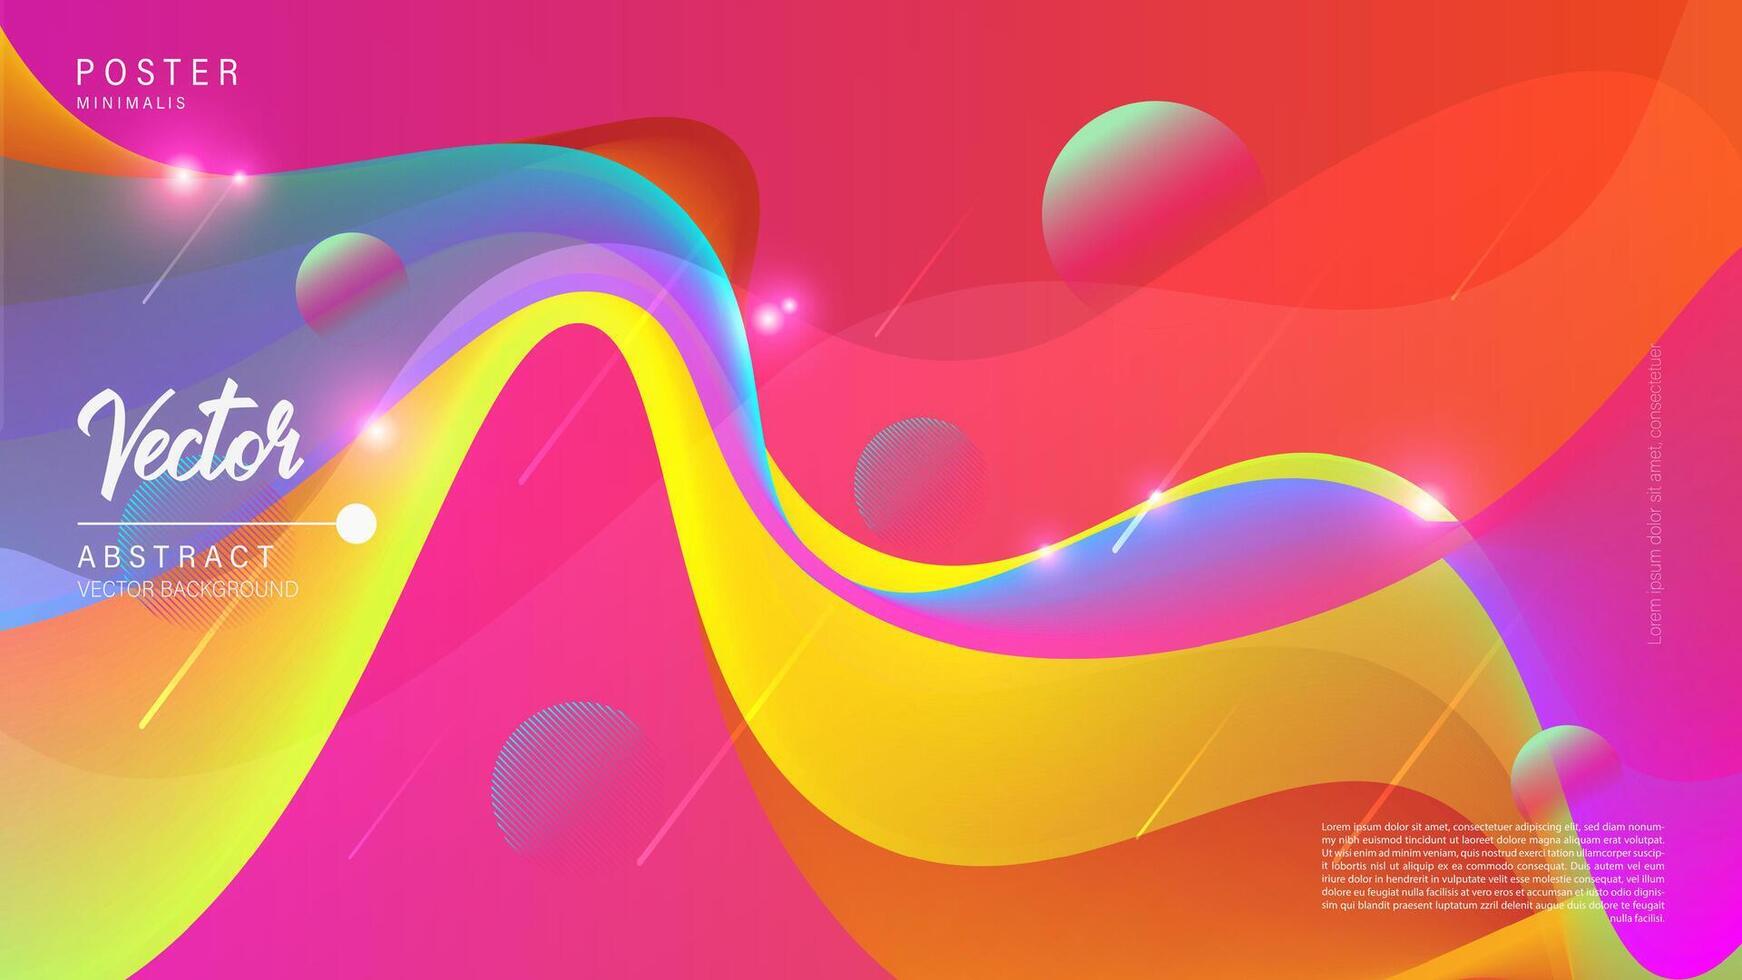 Beautiful banner colorful fluid loop background. Vector background 3d style can be used in cover design, book design, poster, cd cover, flyer, website backgrounds or advertising. Vector